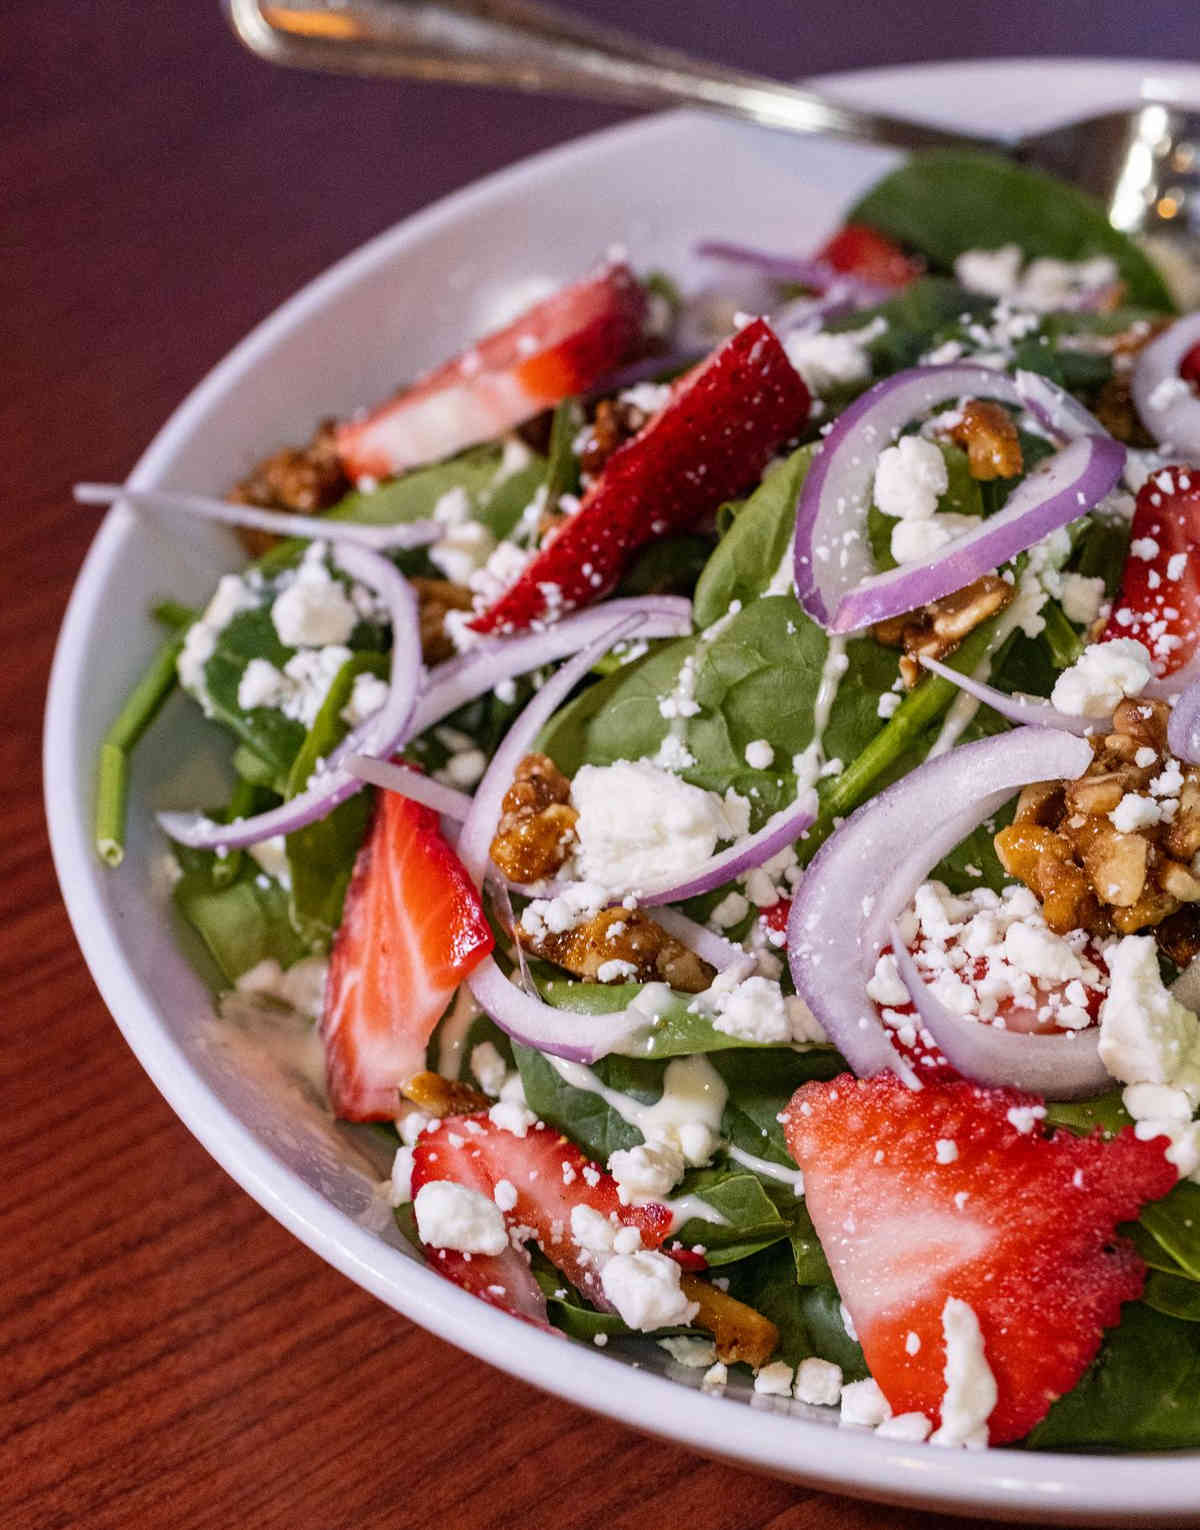 Strawberry Walnut Salad with candied walnut, red onion, cucumber, goat cheese crumble, spinach, and white balsamic vinaigrette